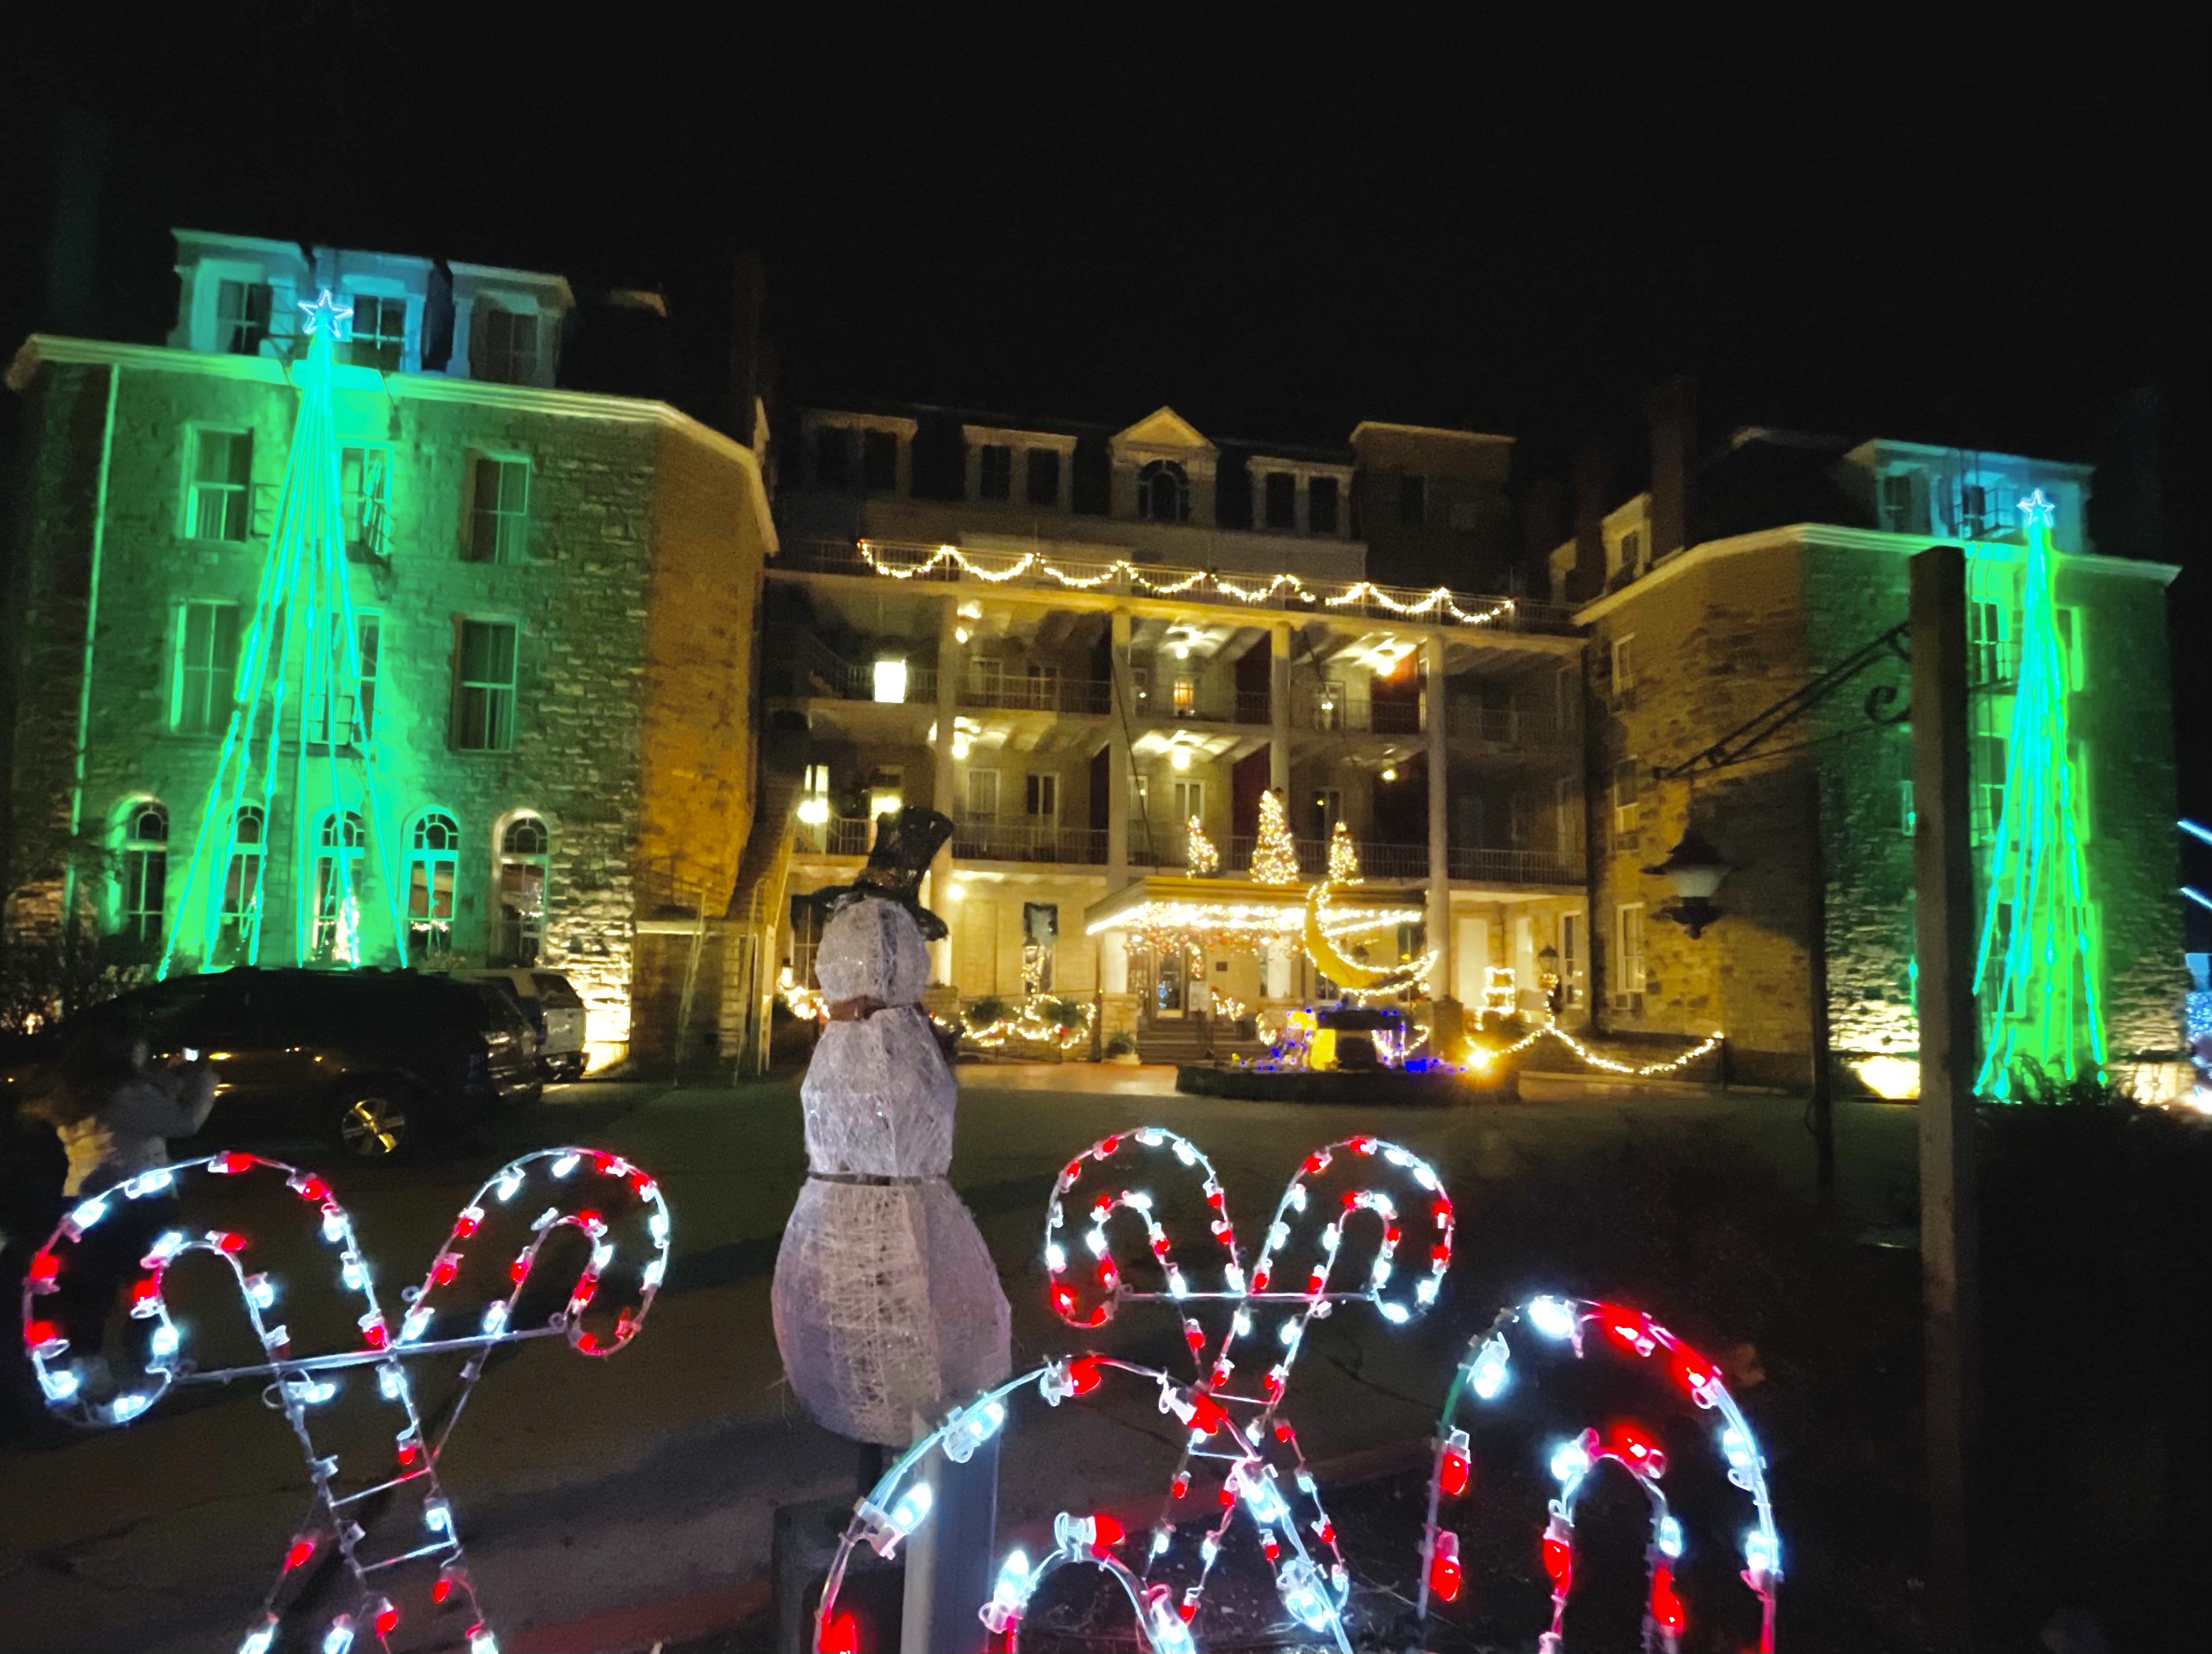 The Crescent Hotel During the Holidays – Everything you need to know about the Family Fun Christmas Activities